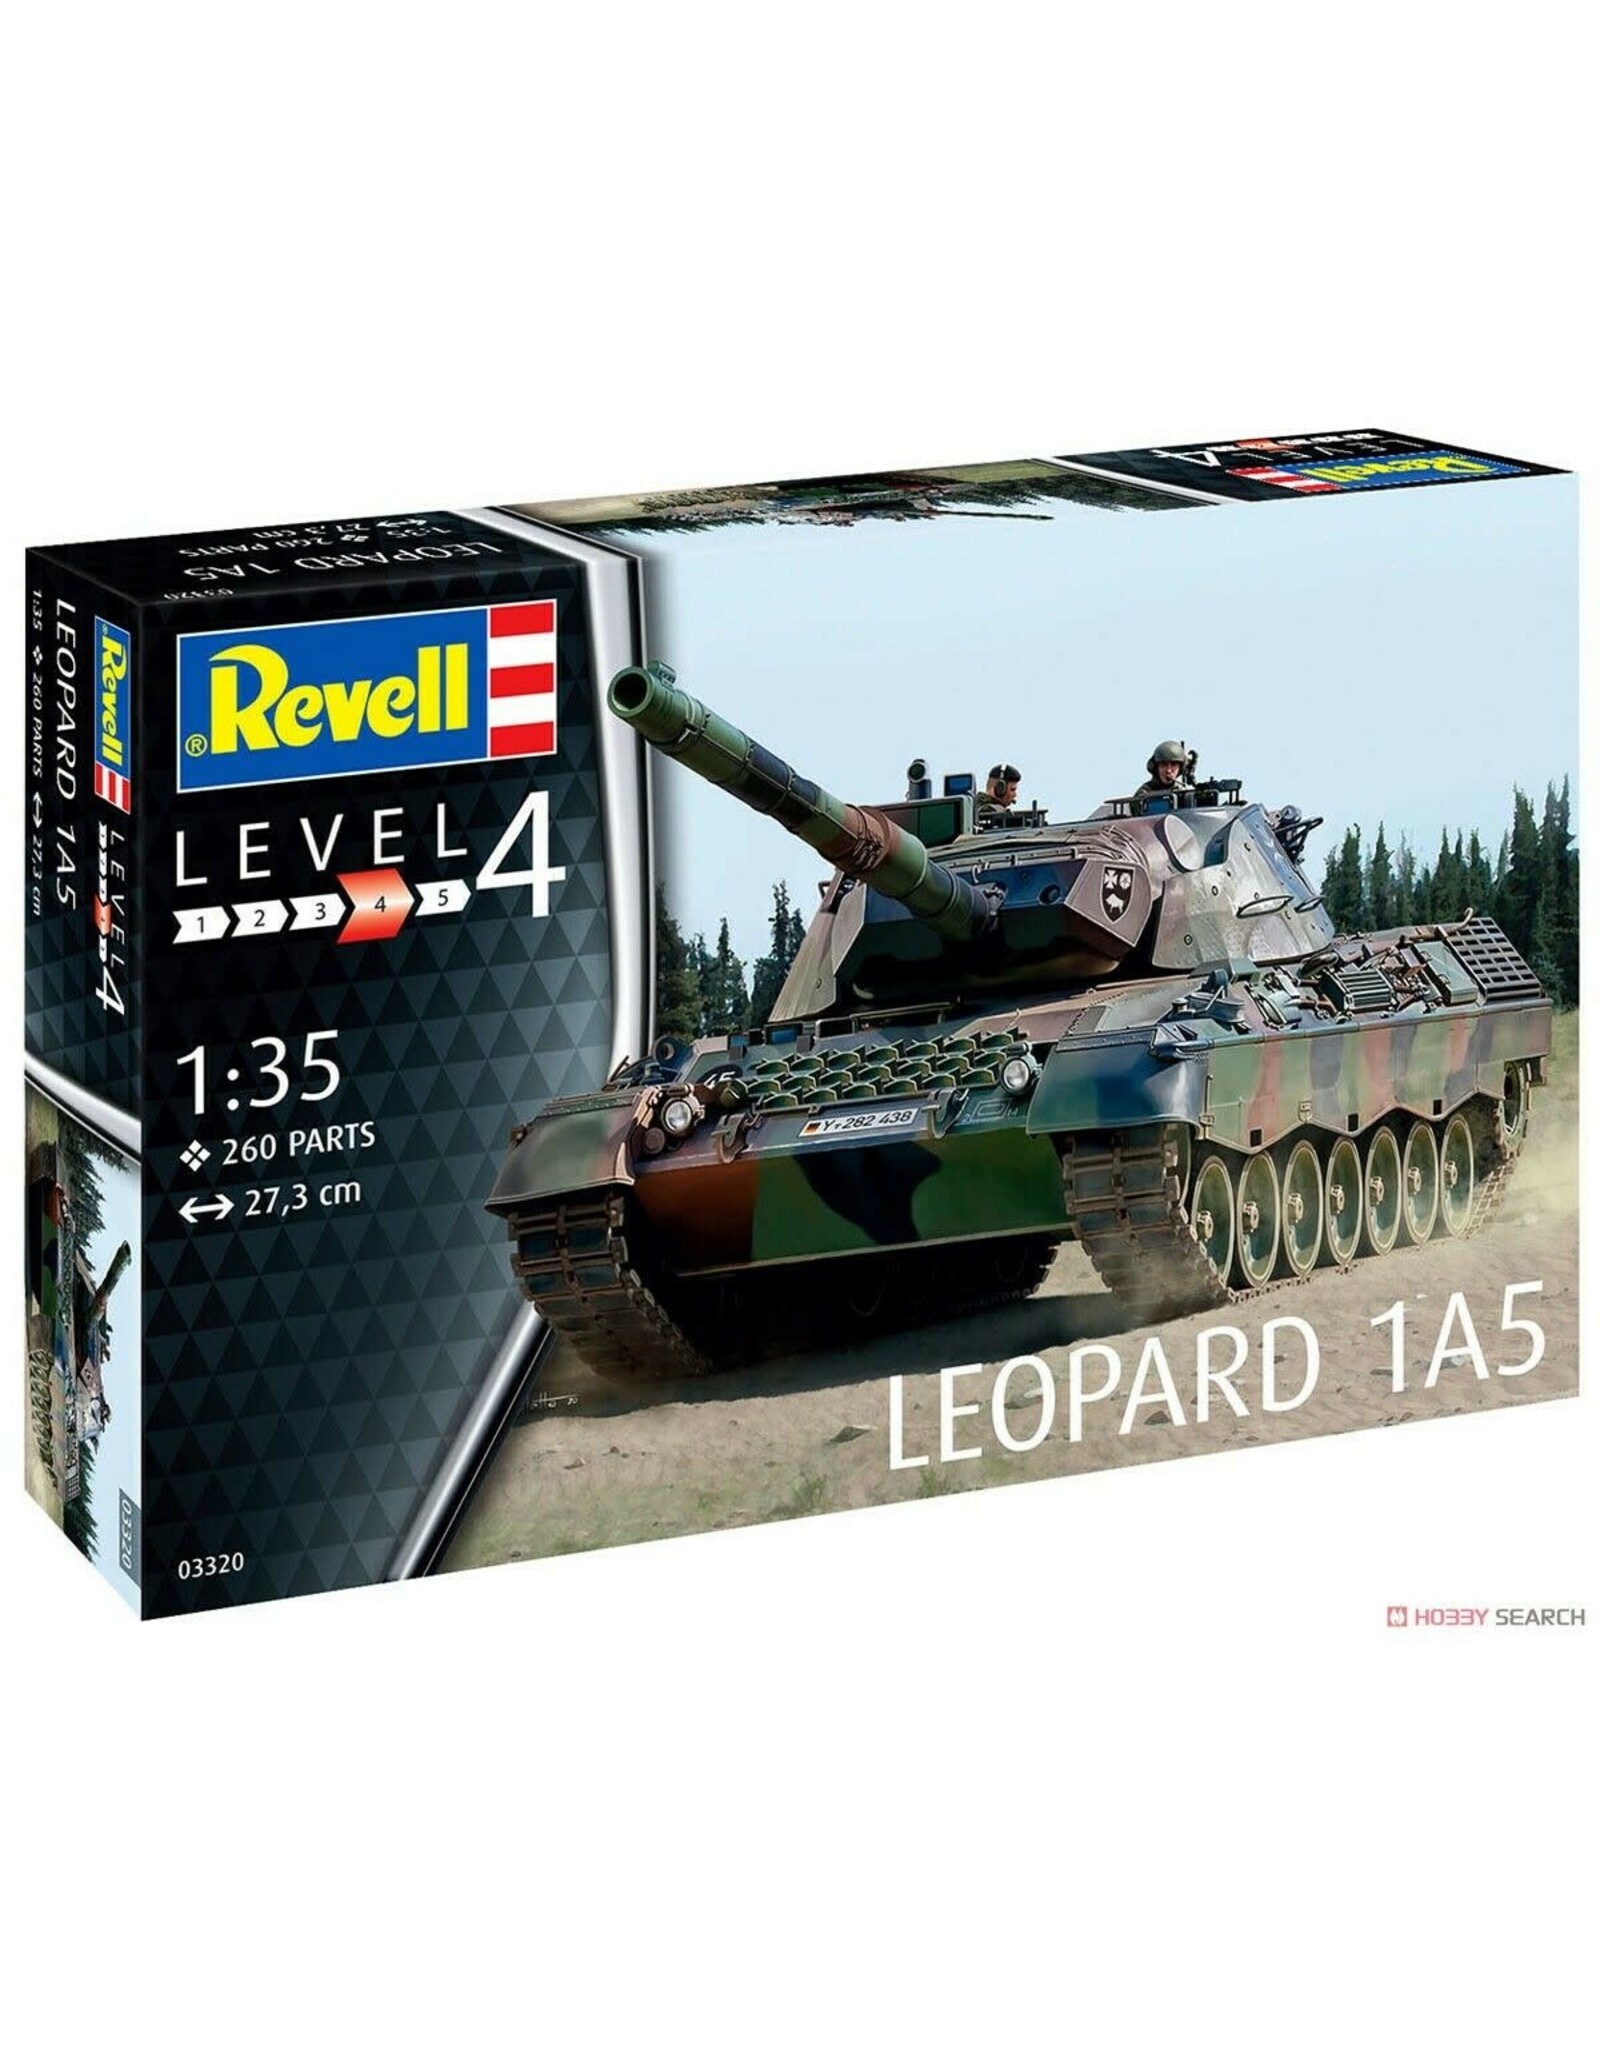 Revell LEOPARD 1A5 (1/35)